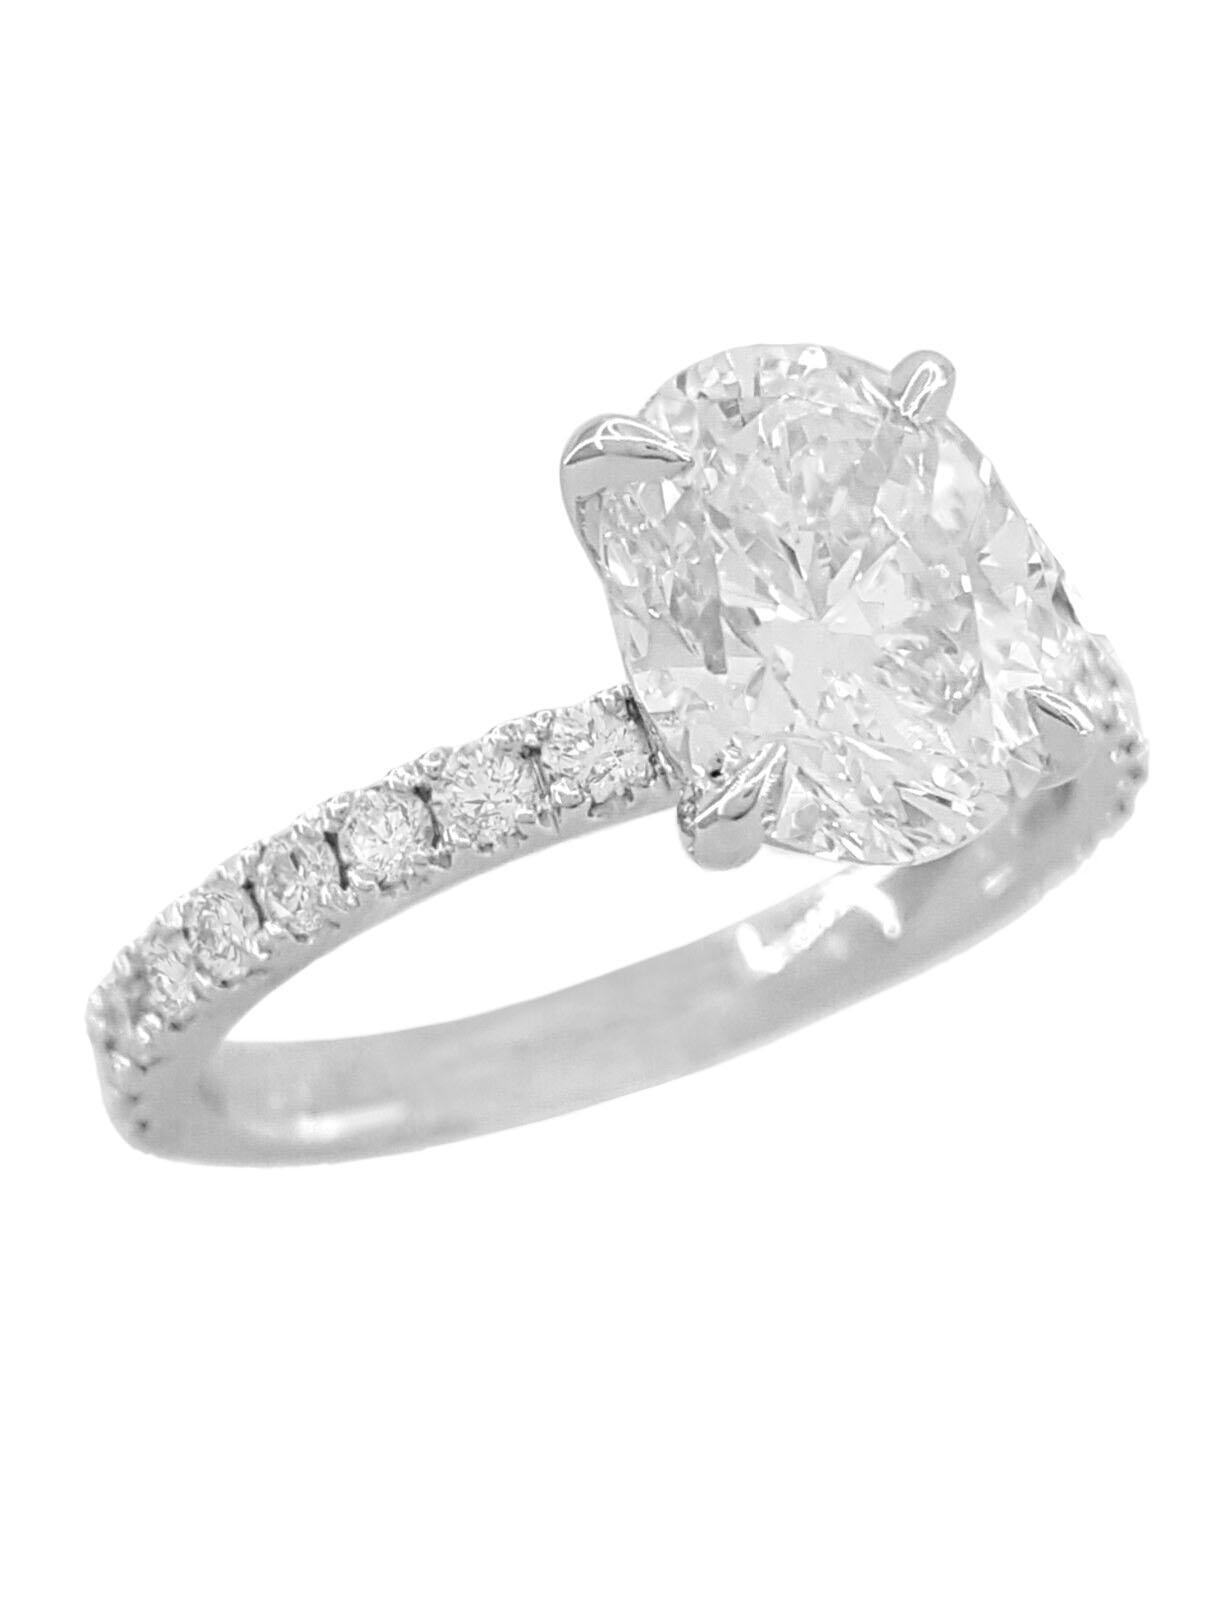 Oval Brilliant Cut Diamond Halo 14k White Gold Engagement Ring. 

The ring weighs 3.1 grams, size 6.75, the center stone is a Natural Oval Brilliant Cut diamond weighing 0.7 ct, E in color, VVS2 in clarity, Good Polish, Good Symmetry & Faint